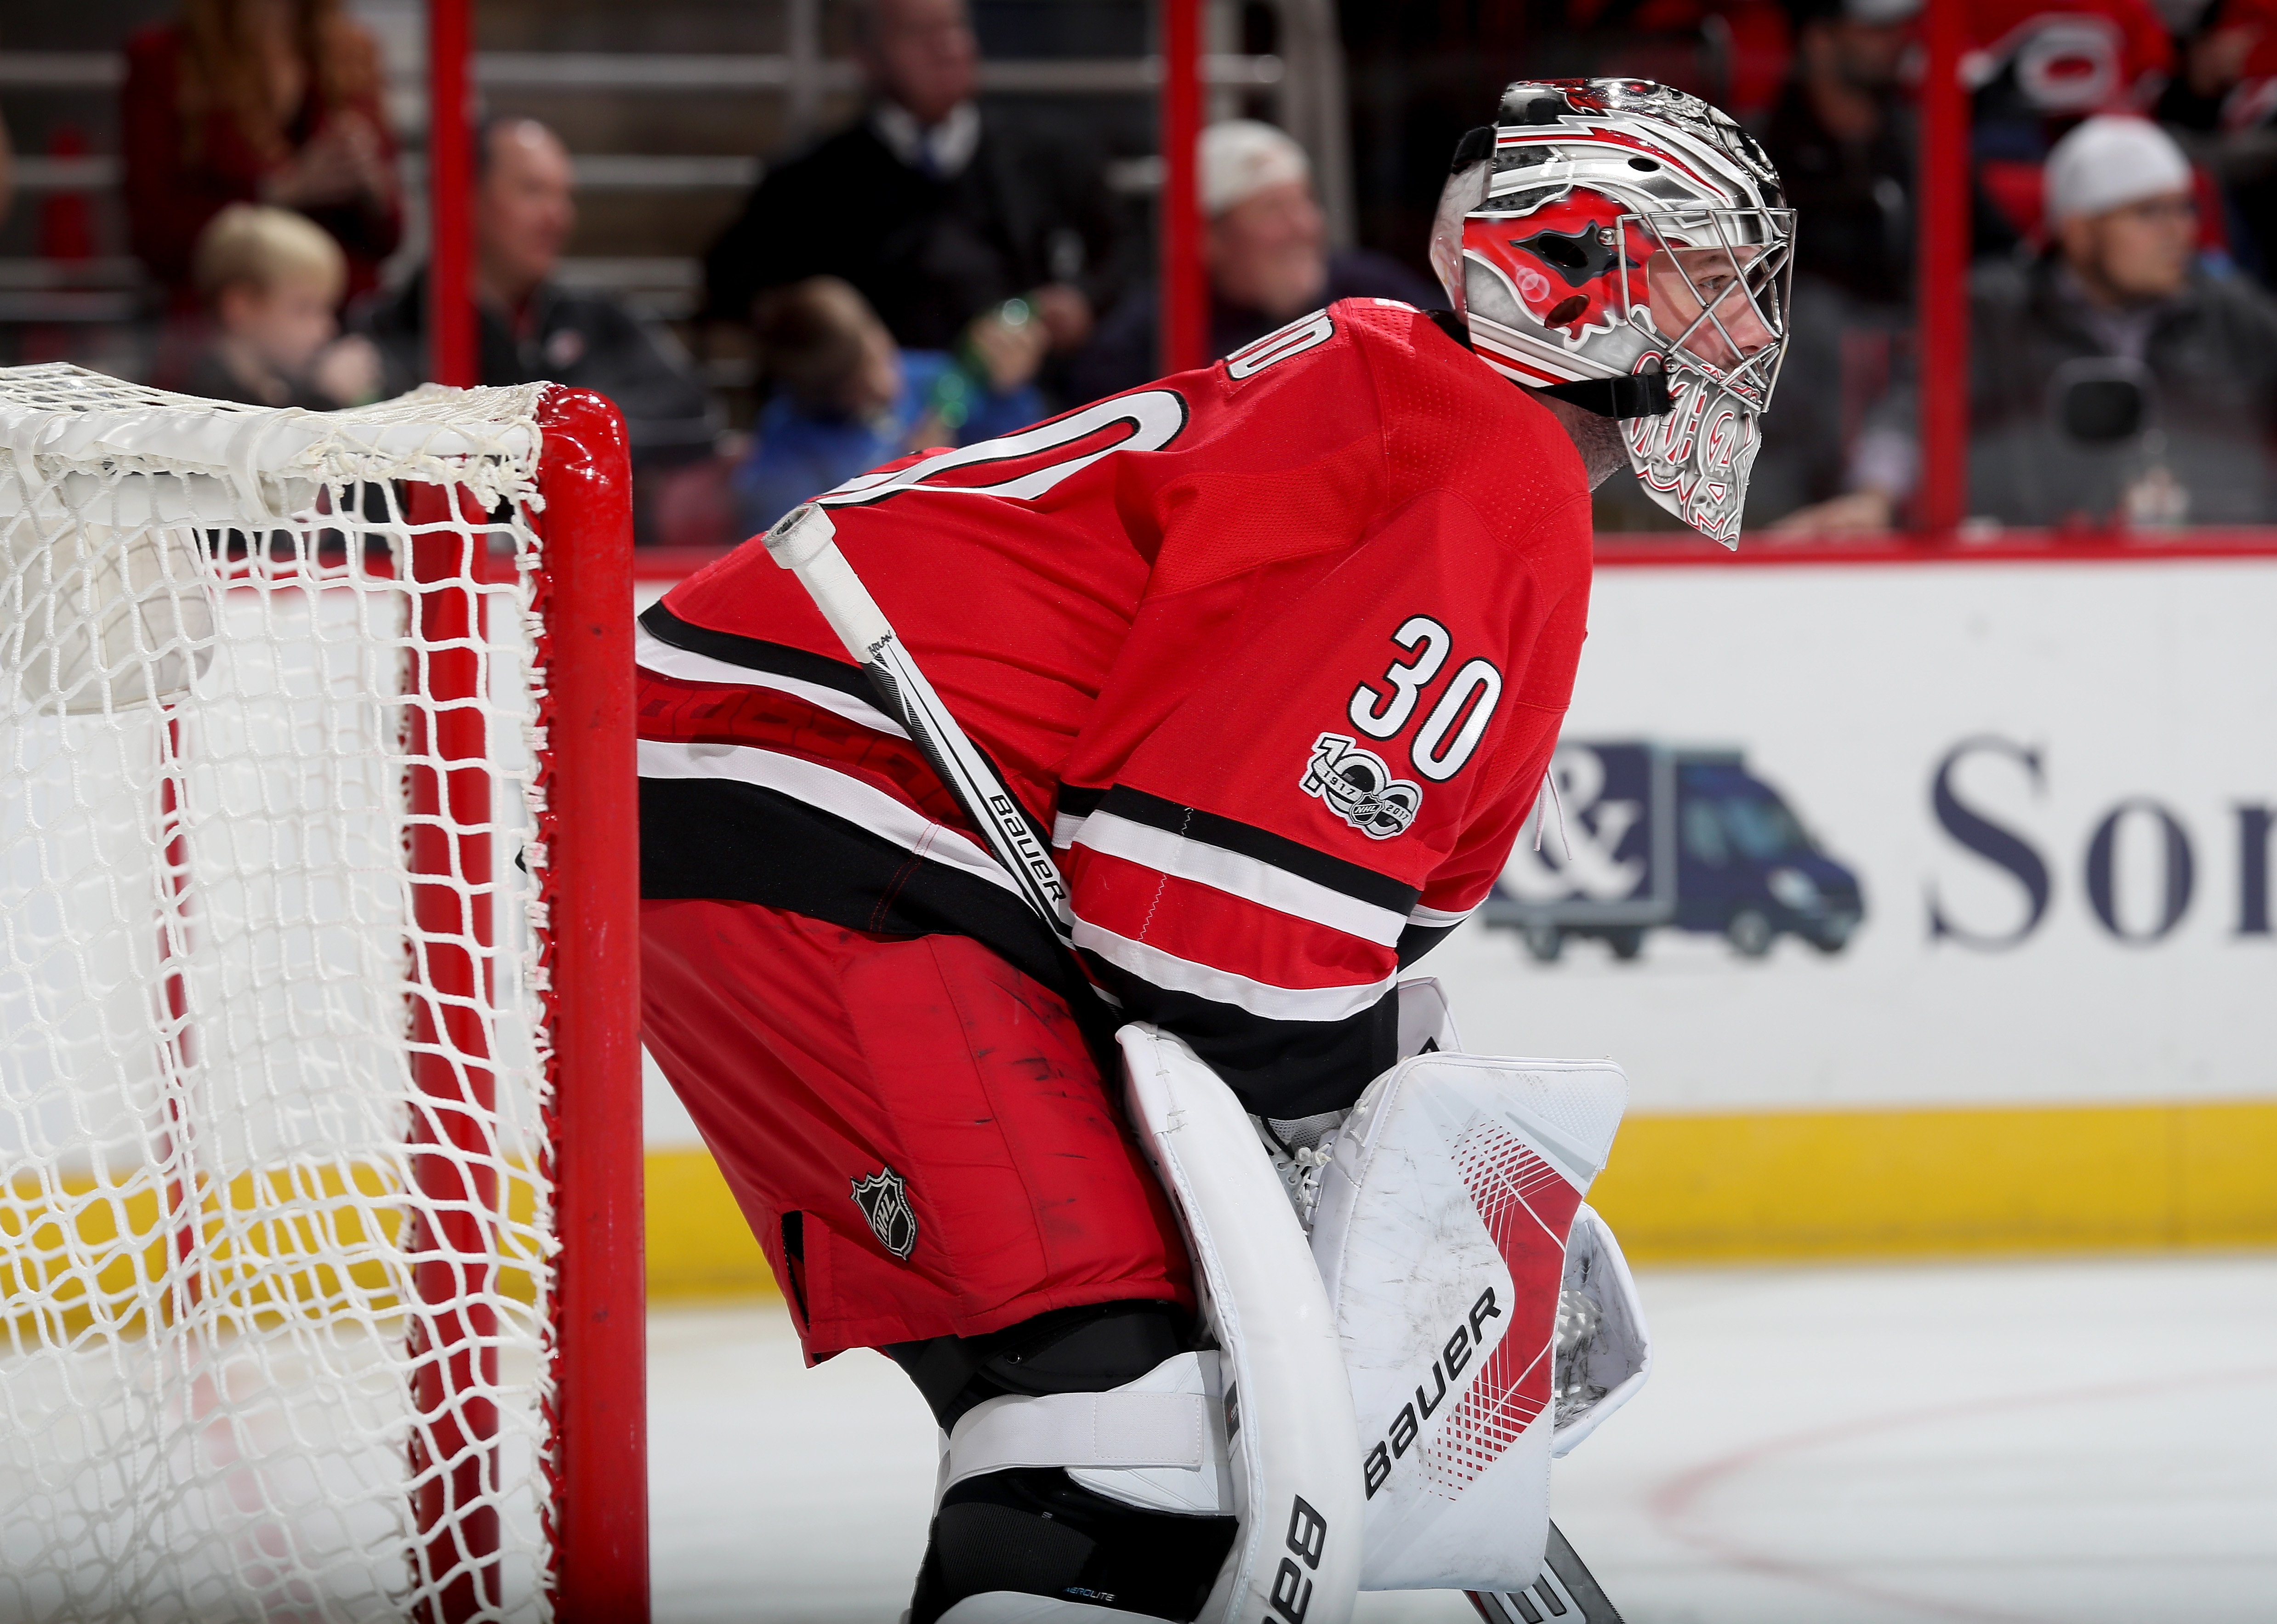 Cam Ward Should Wear A Higher Number - Canes Country